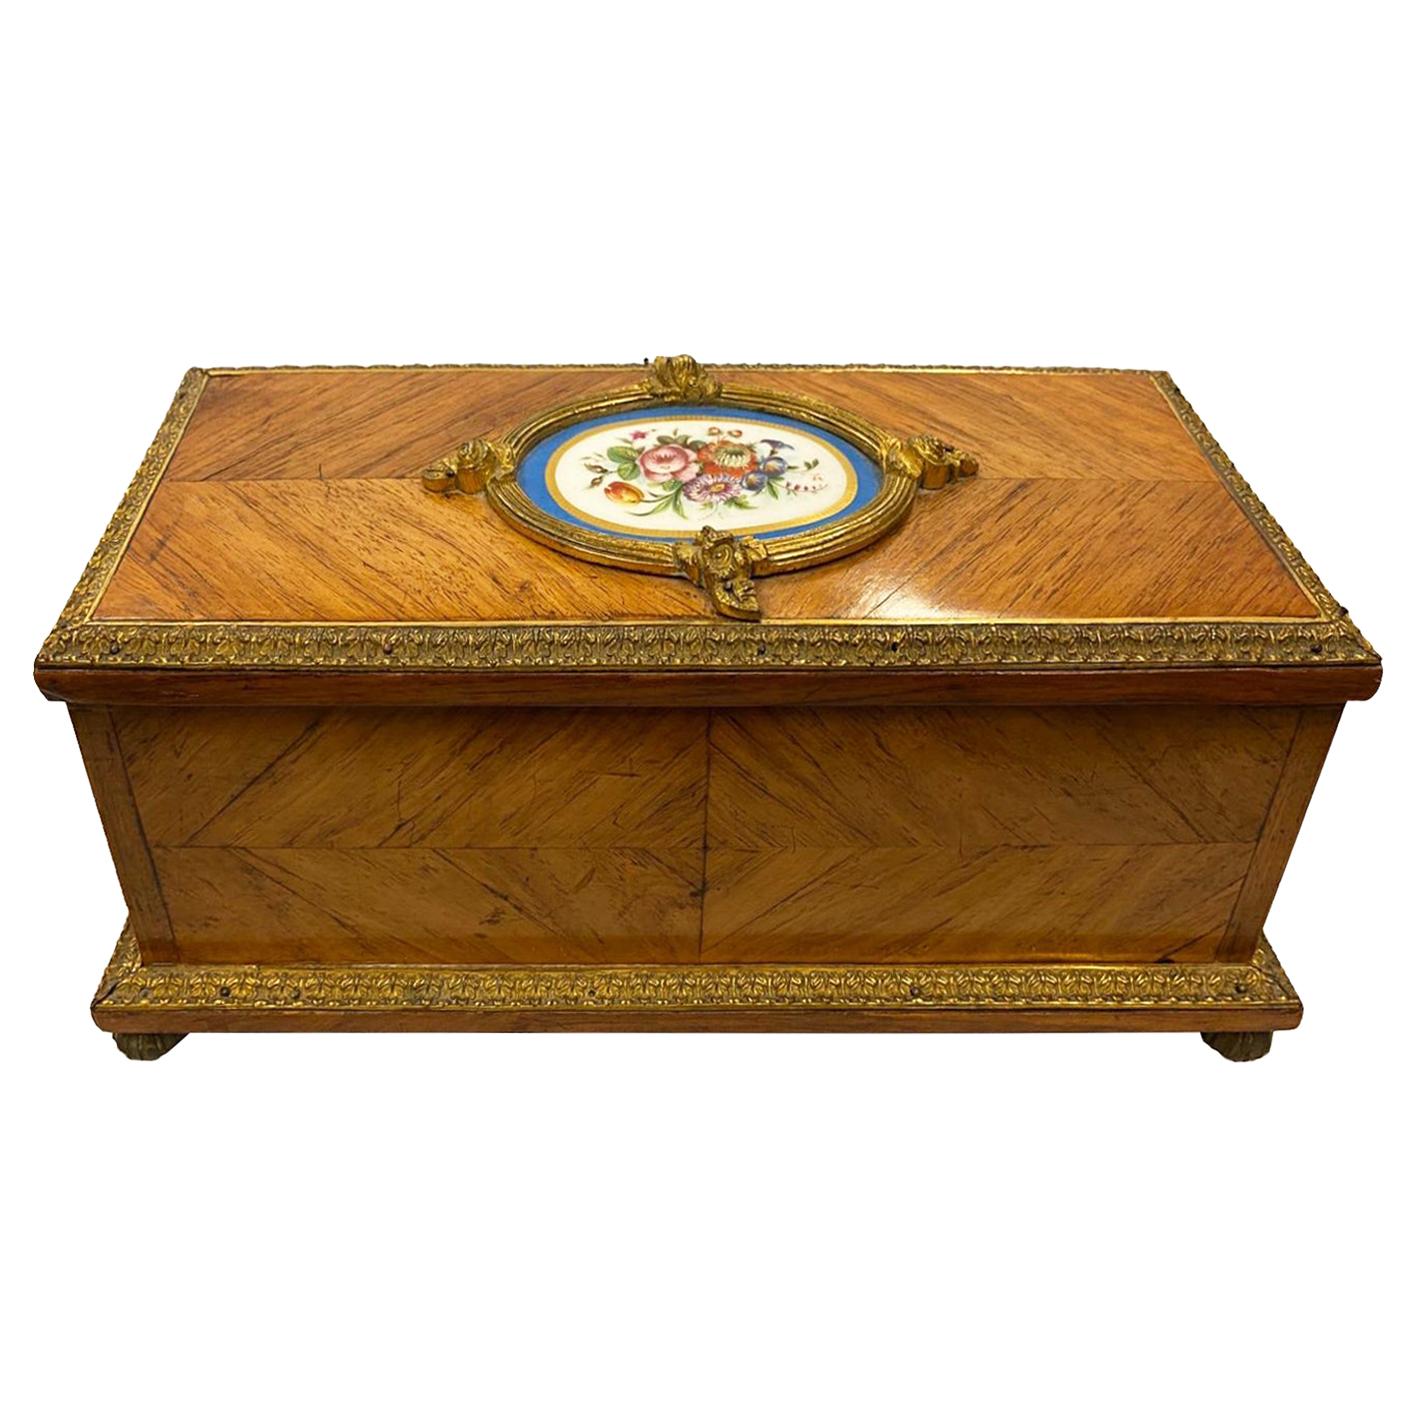 French 19th Century 'Sevres' Porcelain Mounted Casket For Sale